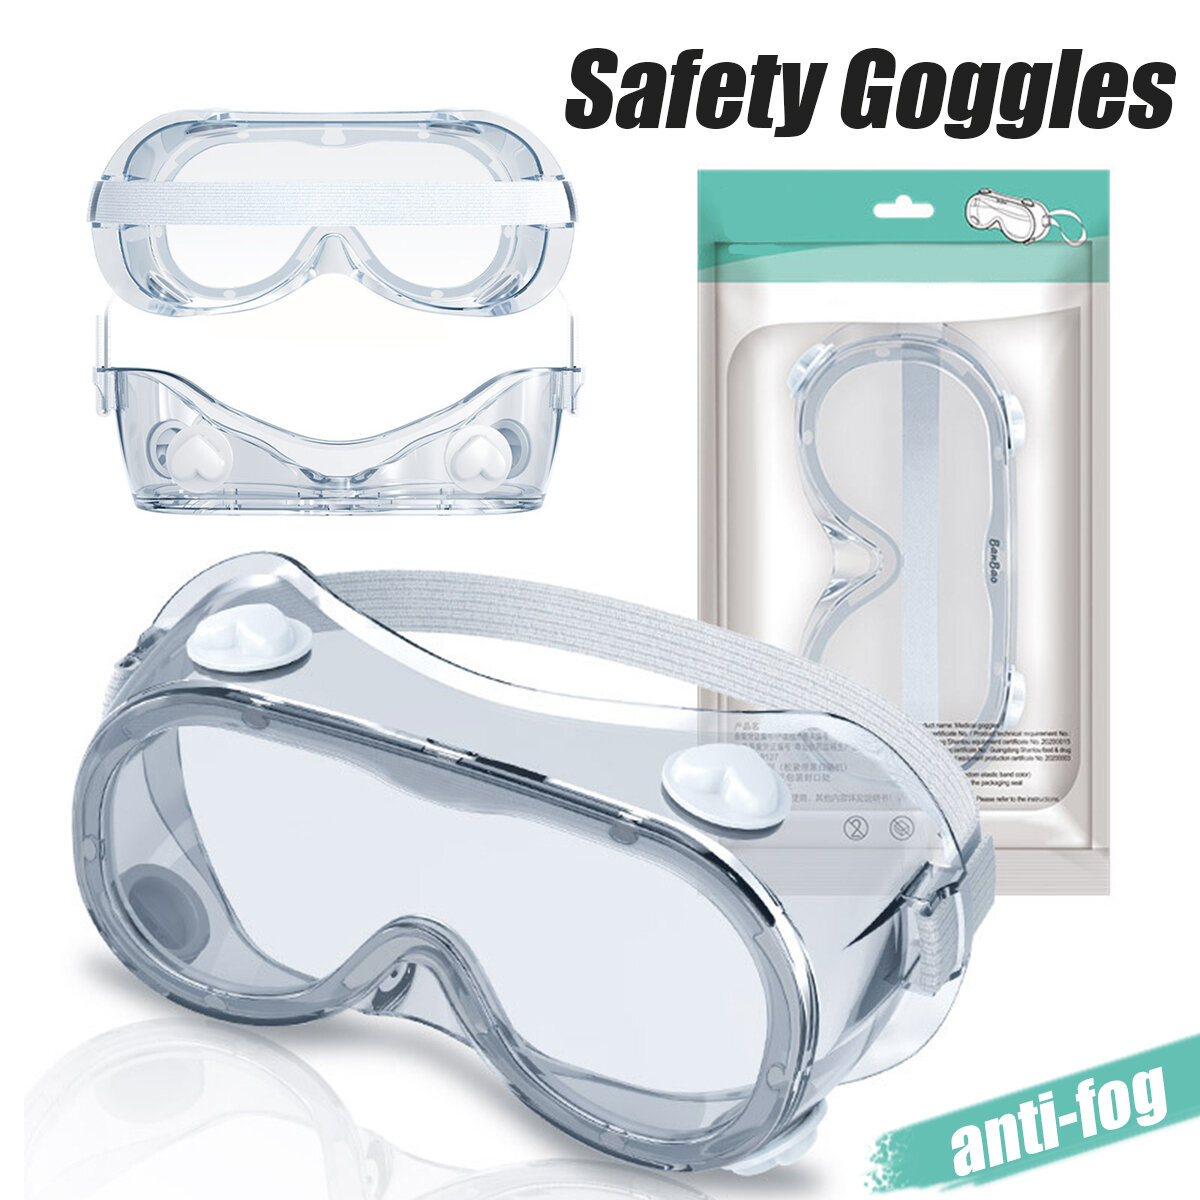 FDA Protective Safety Goggles Wide Vision Prevent Infection Eye Mask Anti-Fog Medical Splash Goggles